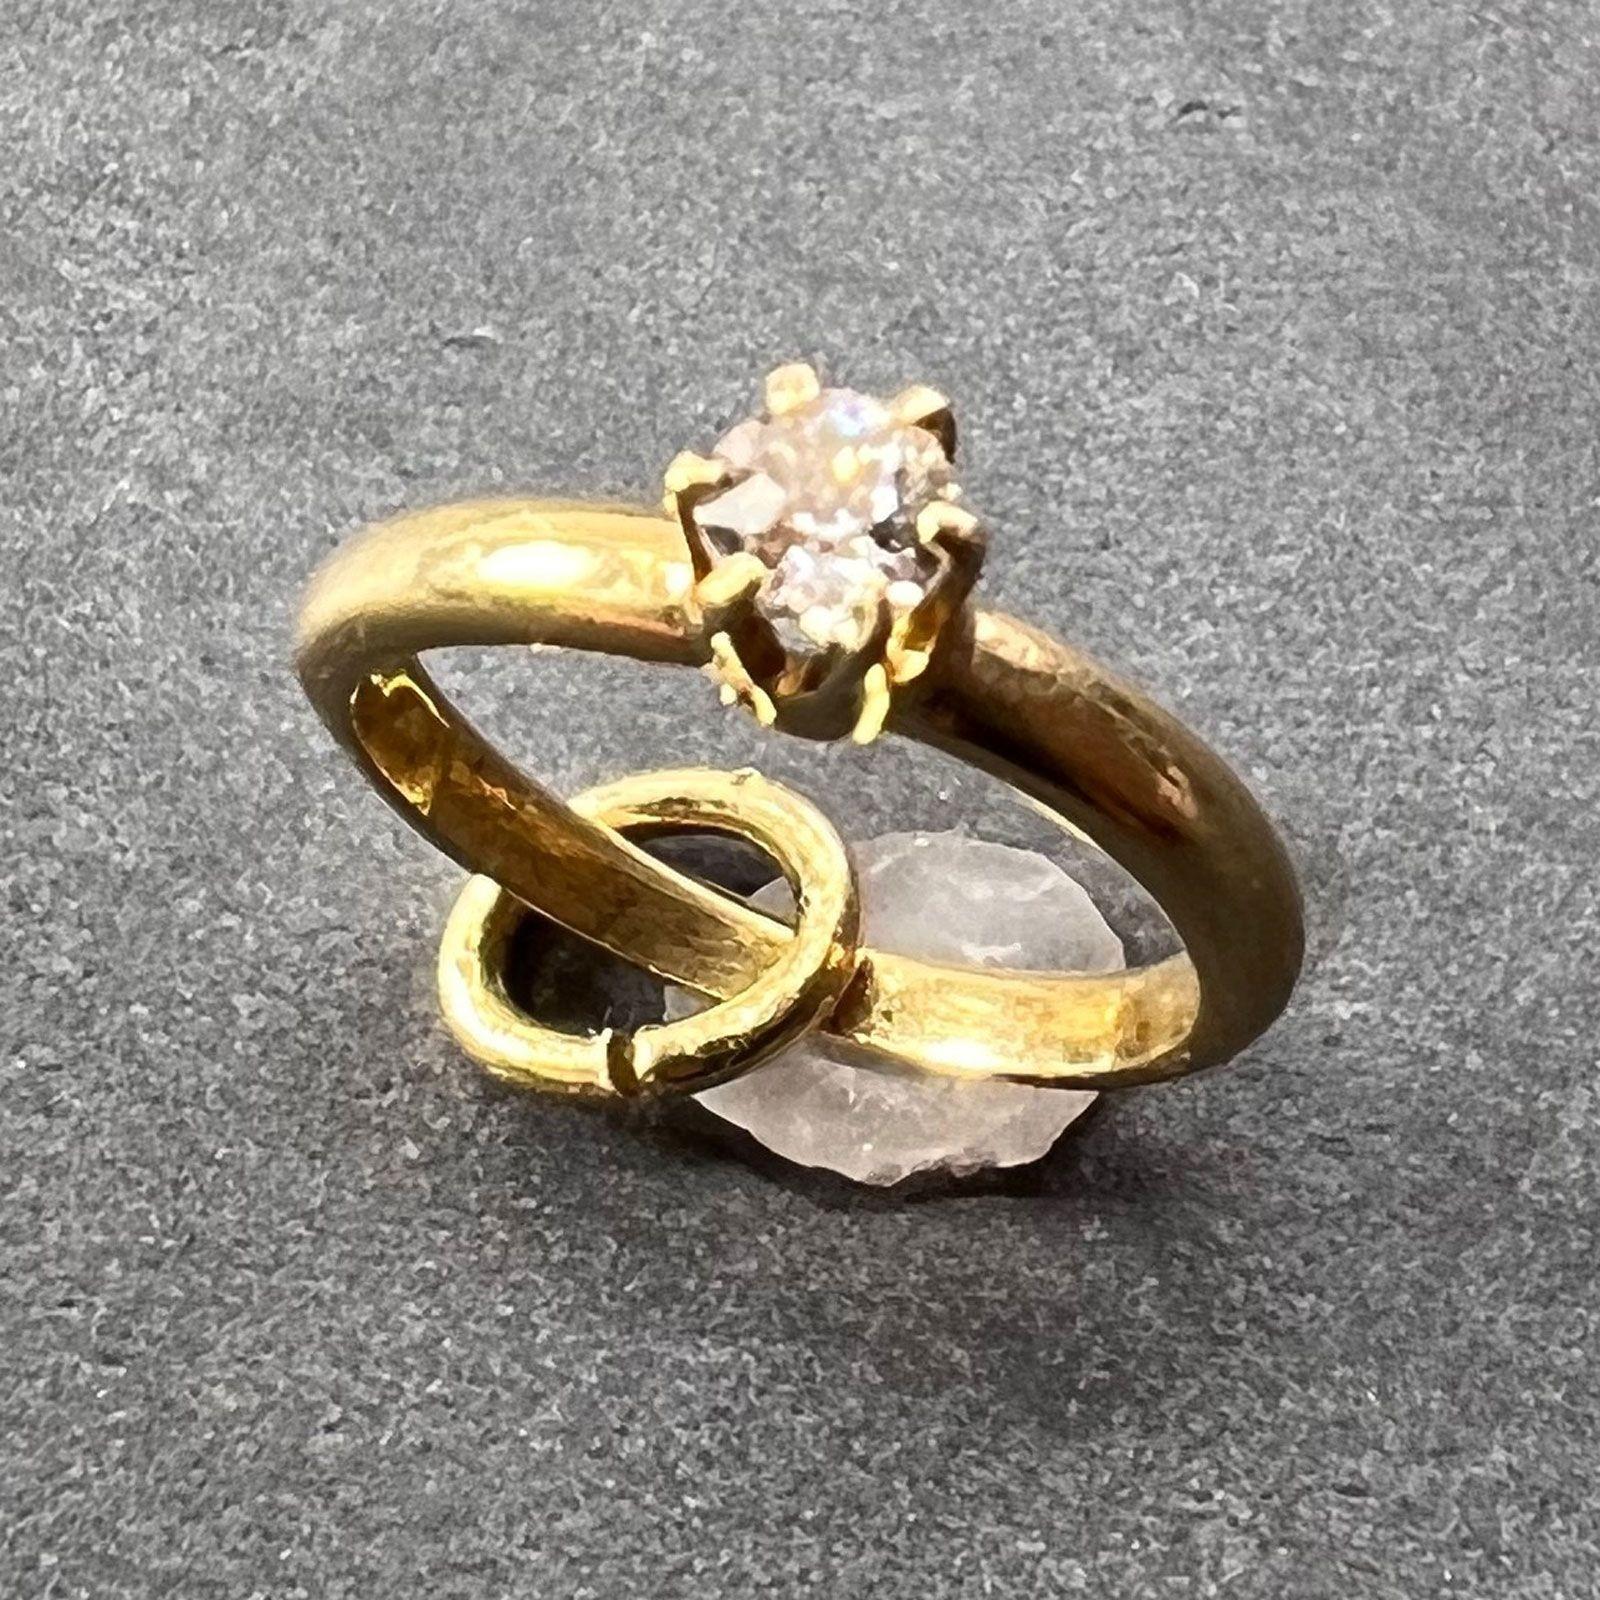 A 14 karat (14K) yellow gold charm pendant designed as an engagement ring set with a solitaire old cut white diamond weighing approximately 0.03 carats. Unmarked but tested for 14 karat gold.

Dimensions: 1.2 x 1 x 0.25 cm (not including jump